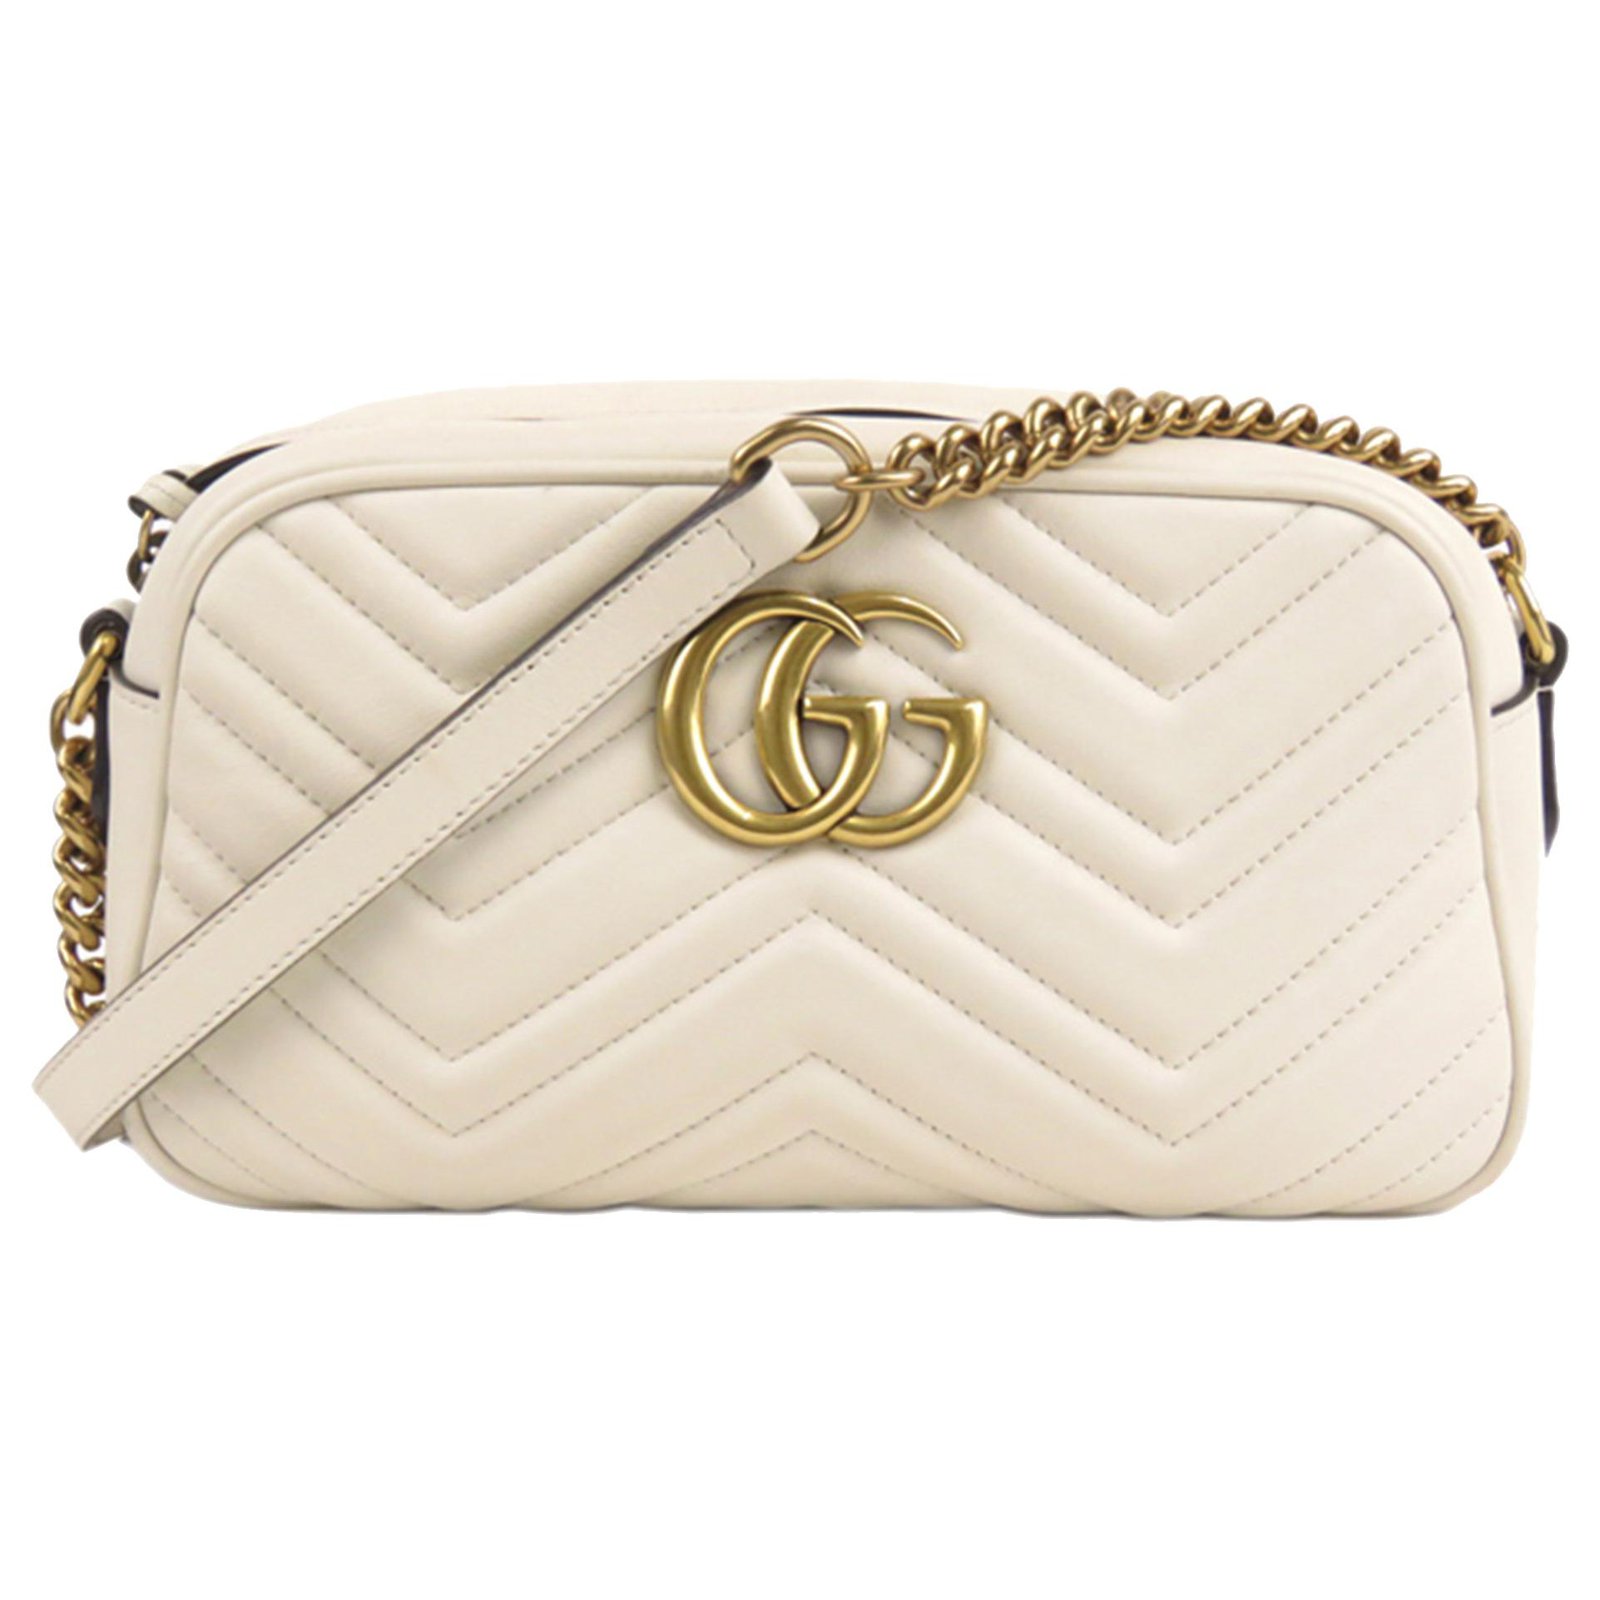 gucci gg marmont leather crossbody bag